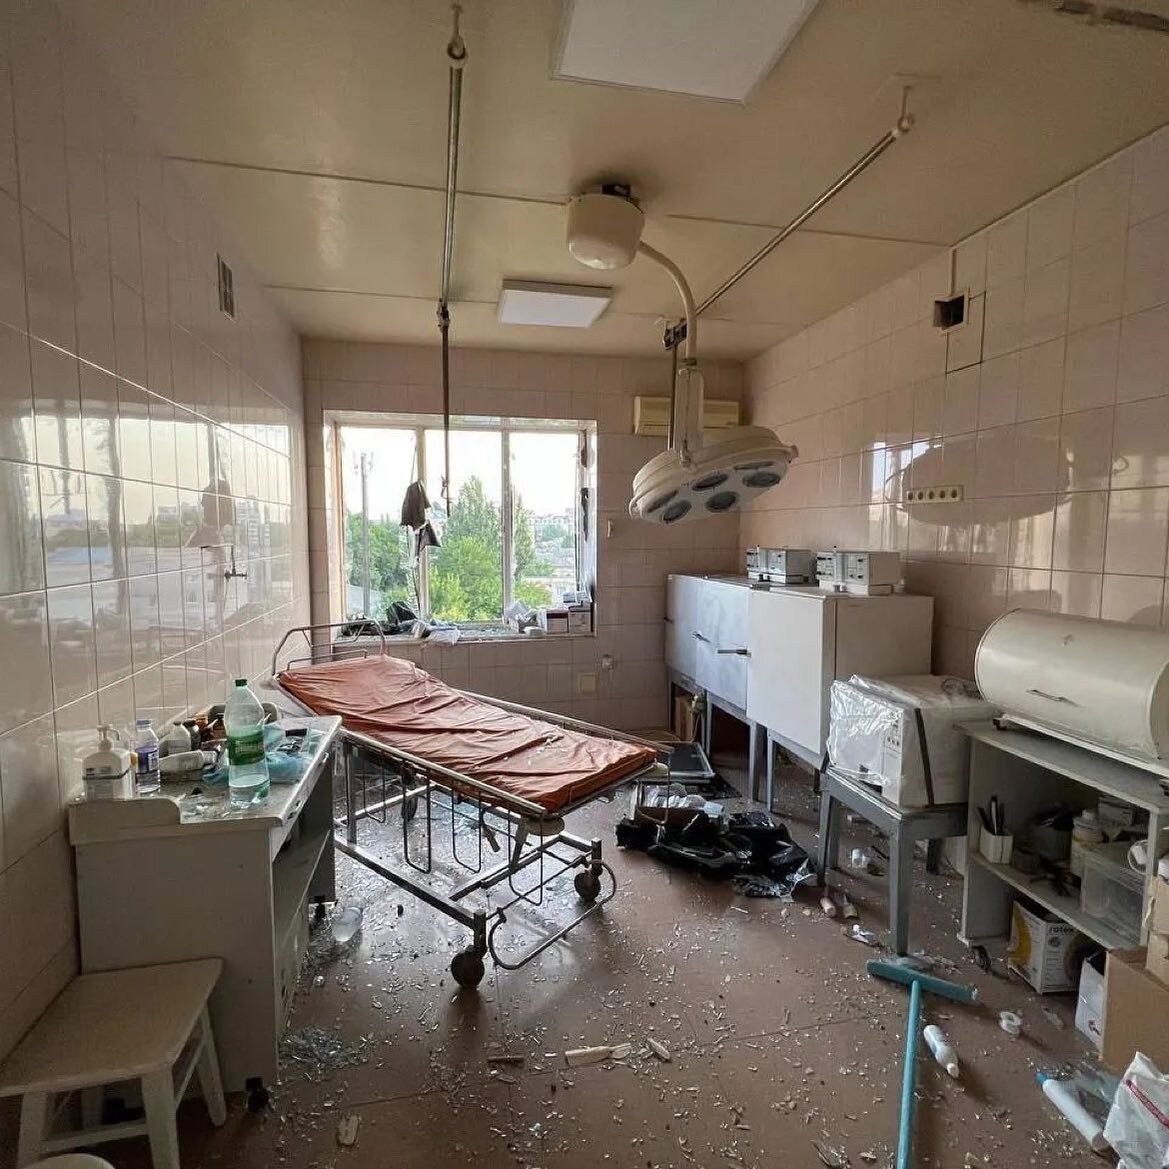 Repost from @ukraine.ua
&bull;
Tonight, the Russian troops shelled civilian objects in Mykolaiv. Again. Among them was this brand-new medical institution, one of Ukraine's most modern trauma centers. The building was partially destroyed. Fortunately,